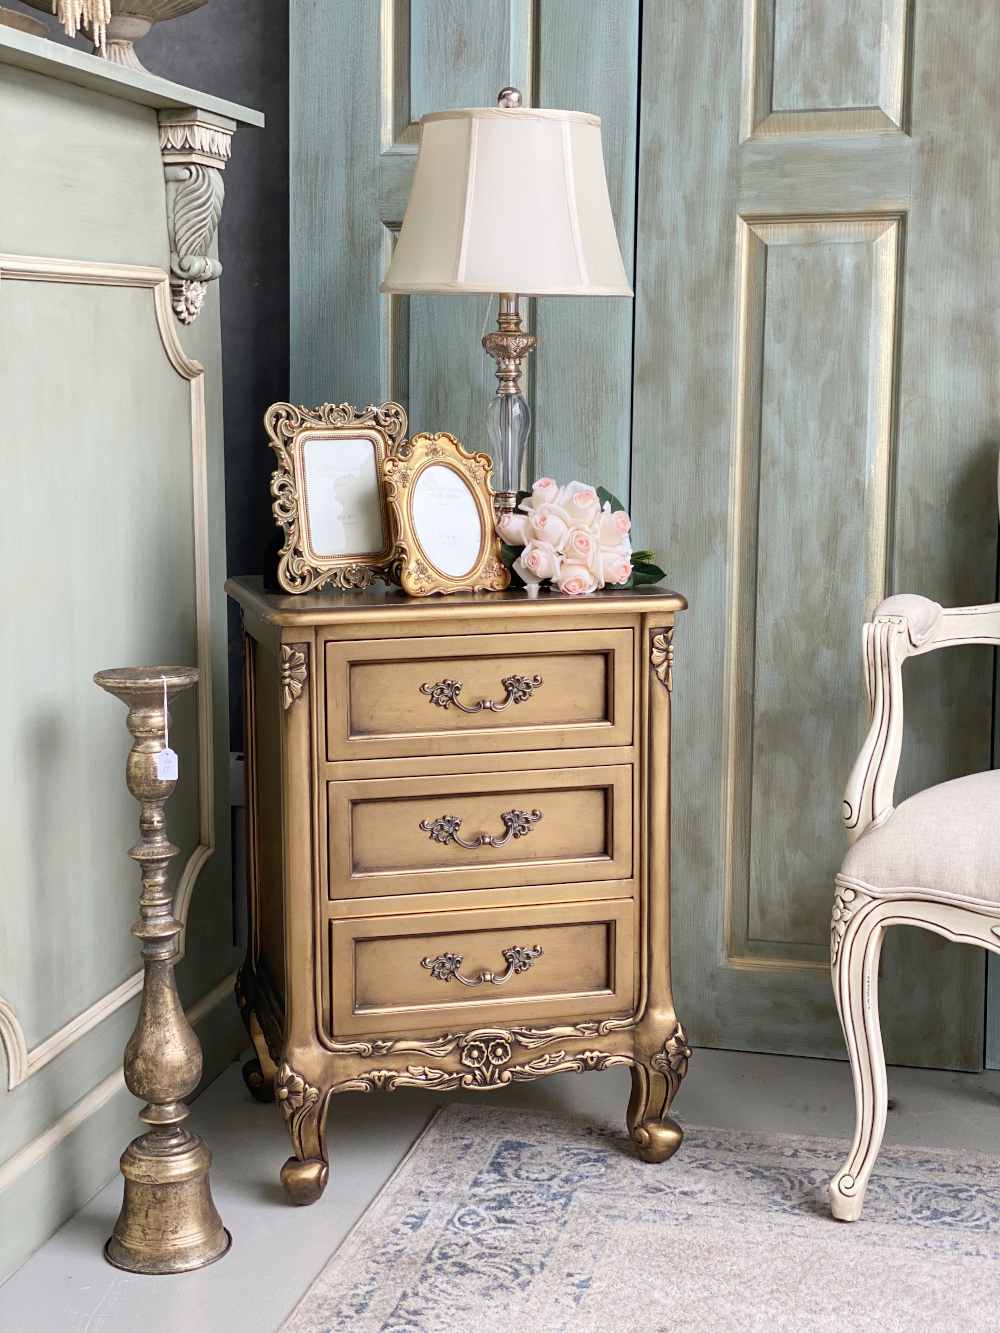 Le Foret Antique Gold Bedside Table, French Provincial Bedside Table Lamps